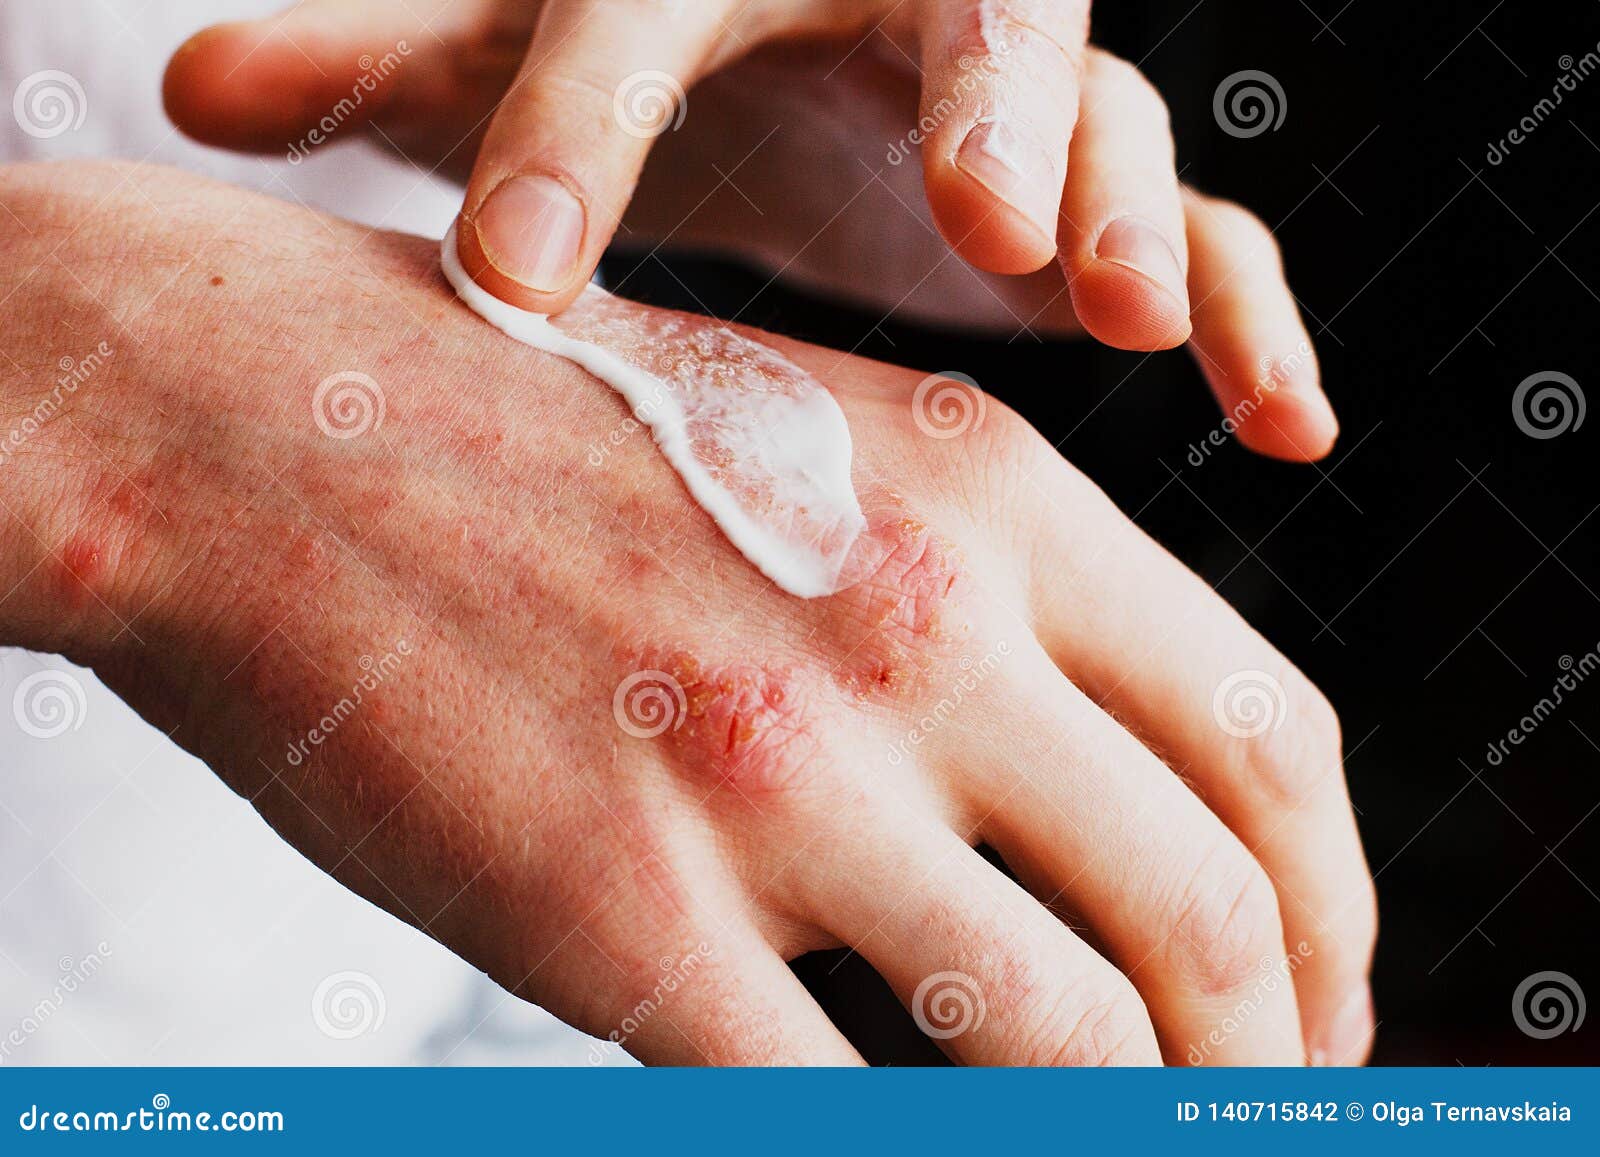 eczema on the hands. the man applying the ointment , creams in the treatment of eczema, psoriasis and other skin